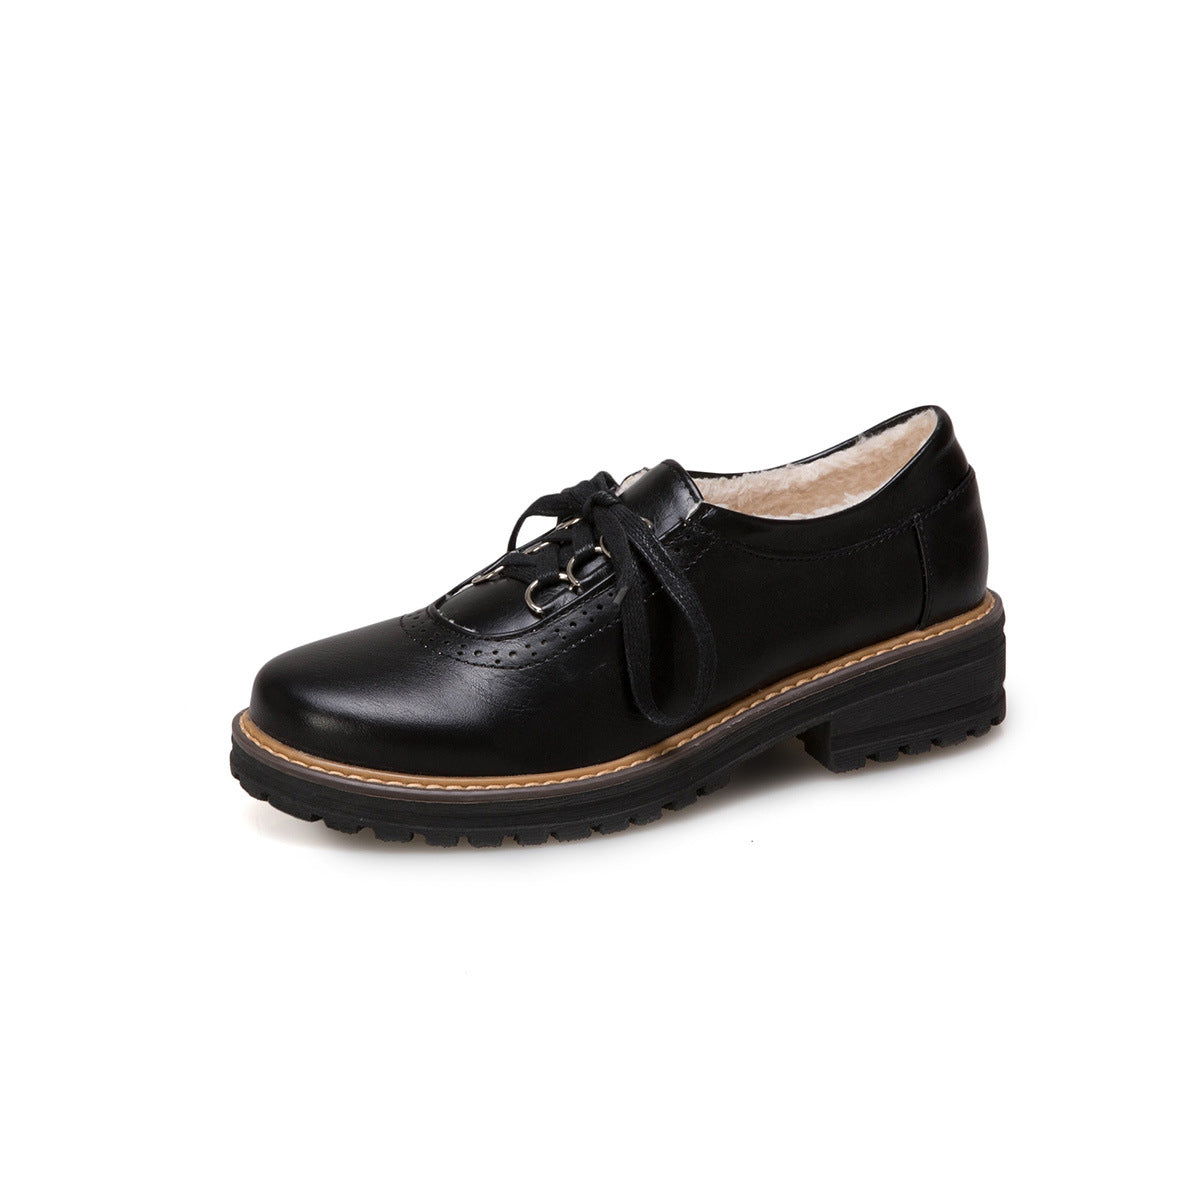 Women's Low Heeled Oxford Shoes